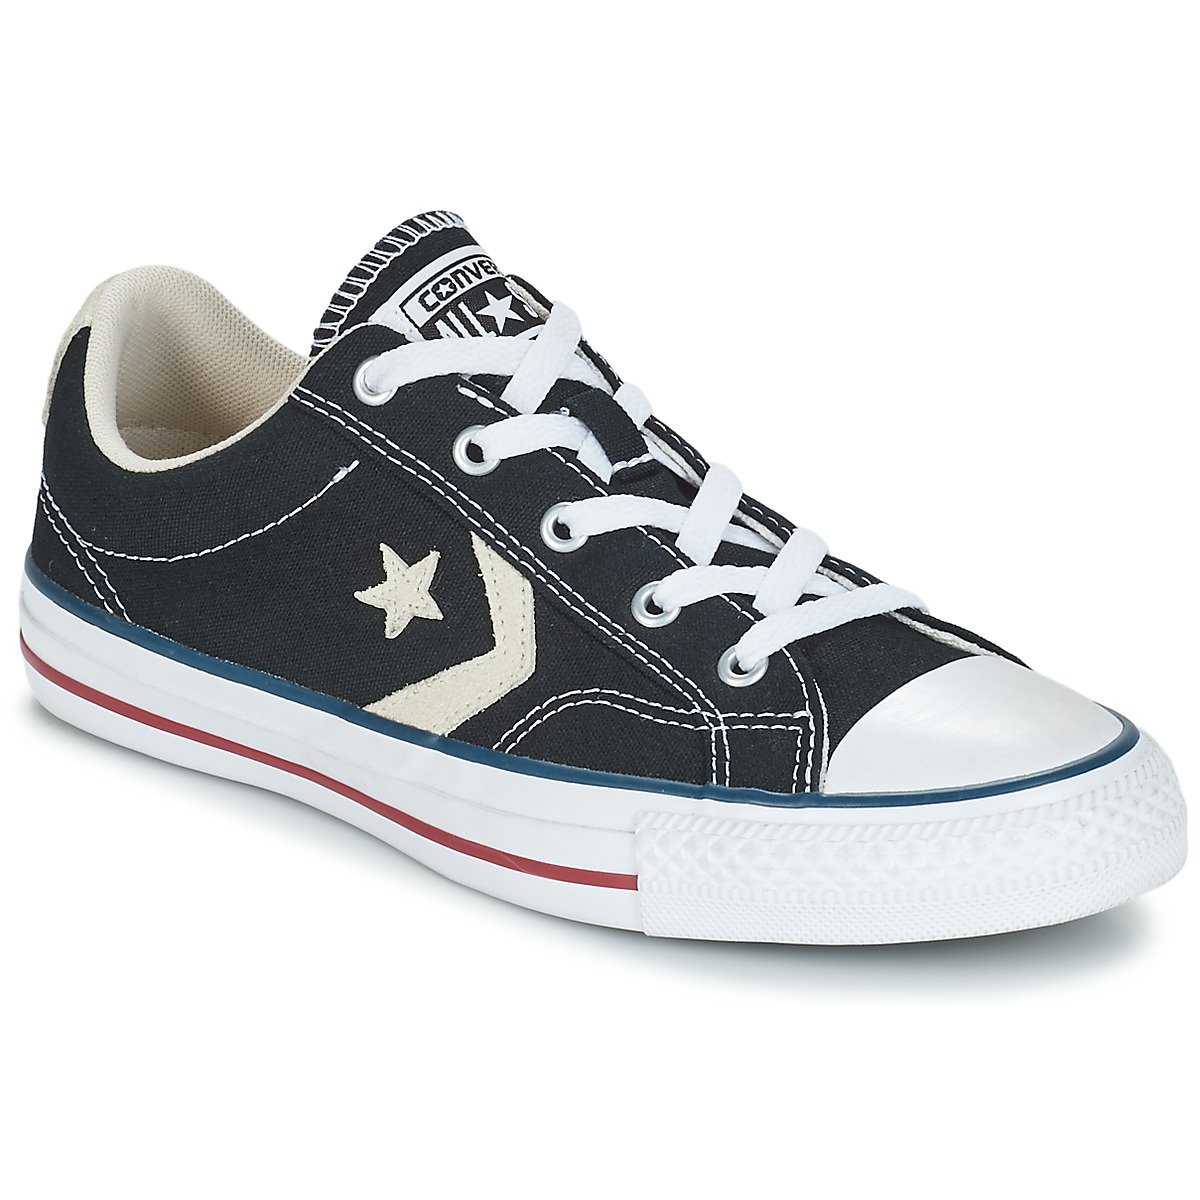 converse star player size 9